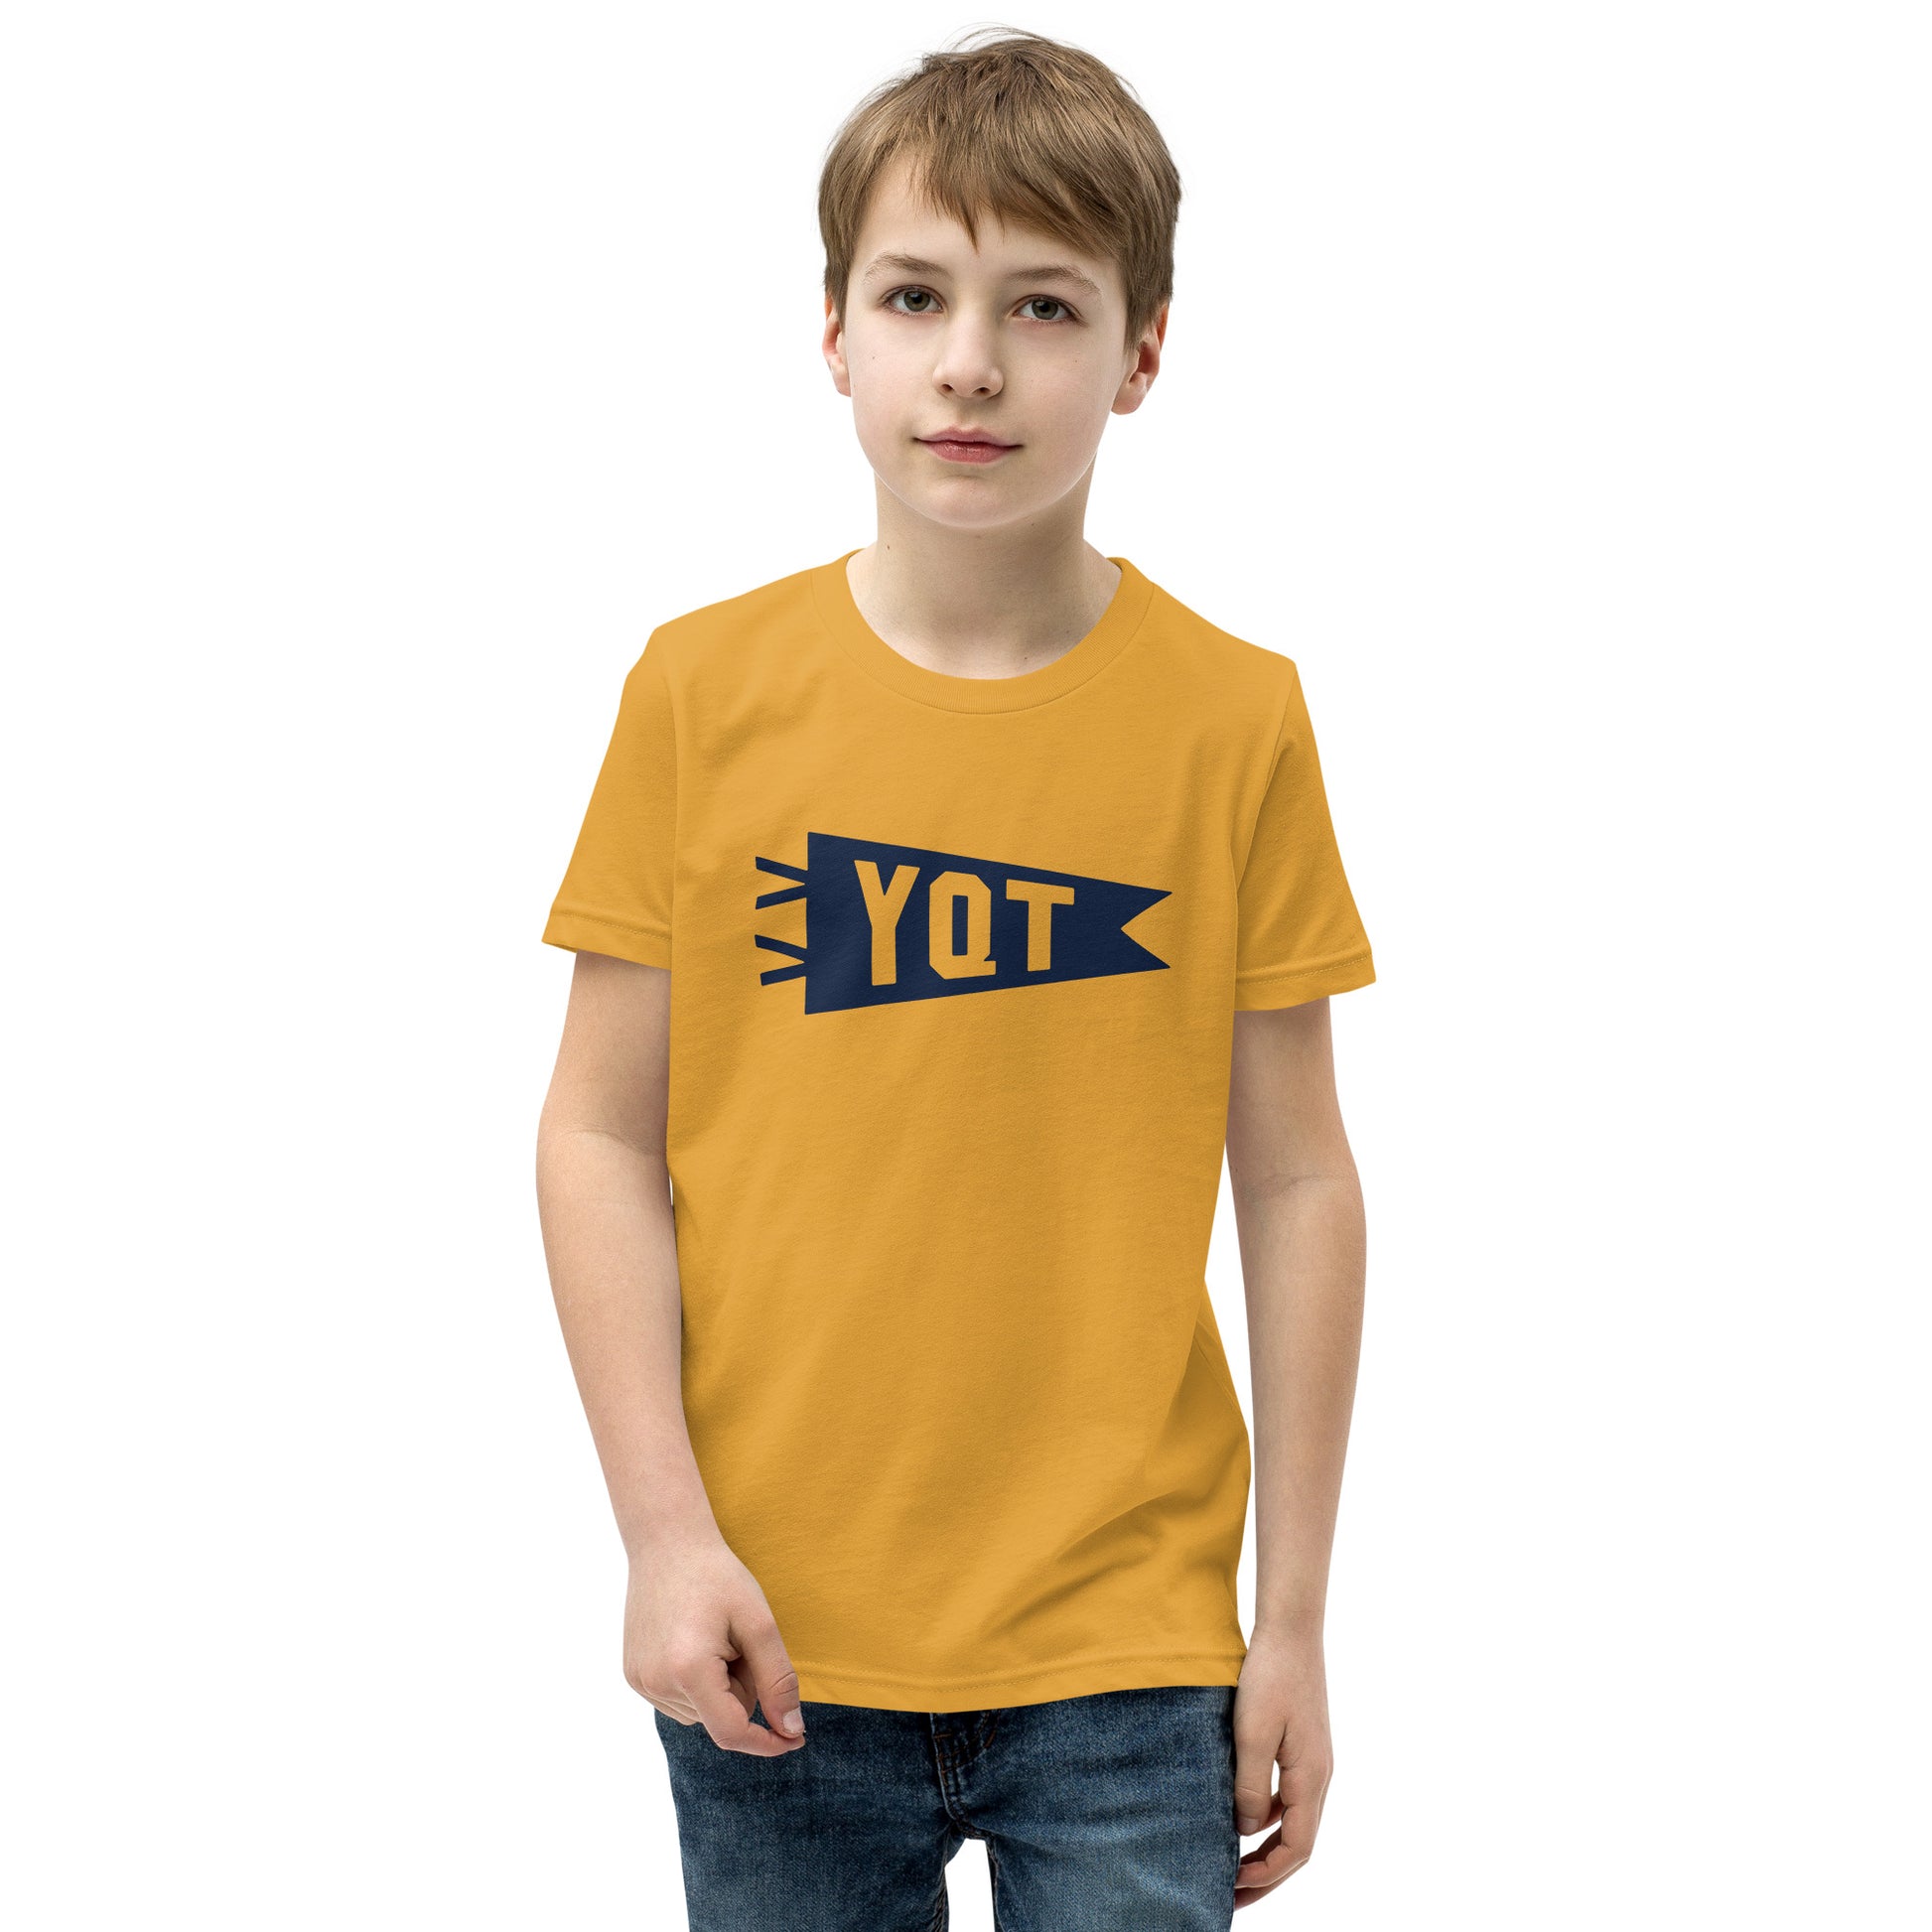 Kid's Airport Code Tee - Navy Blue Graphic • YQT Thunder Bay • YHM Designs - Image 08